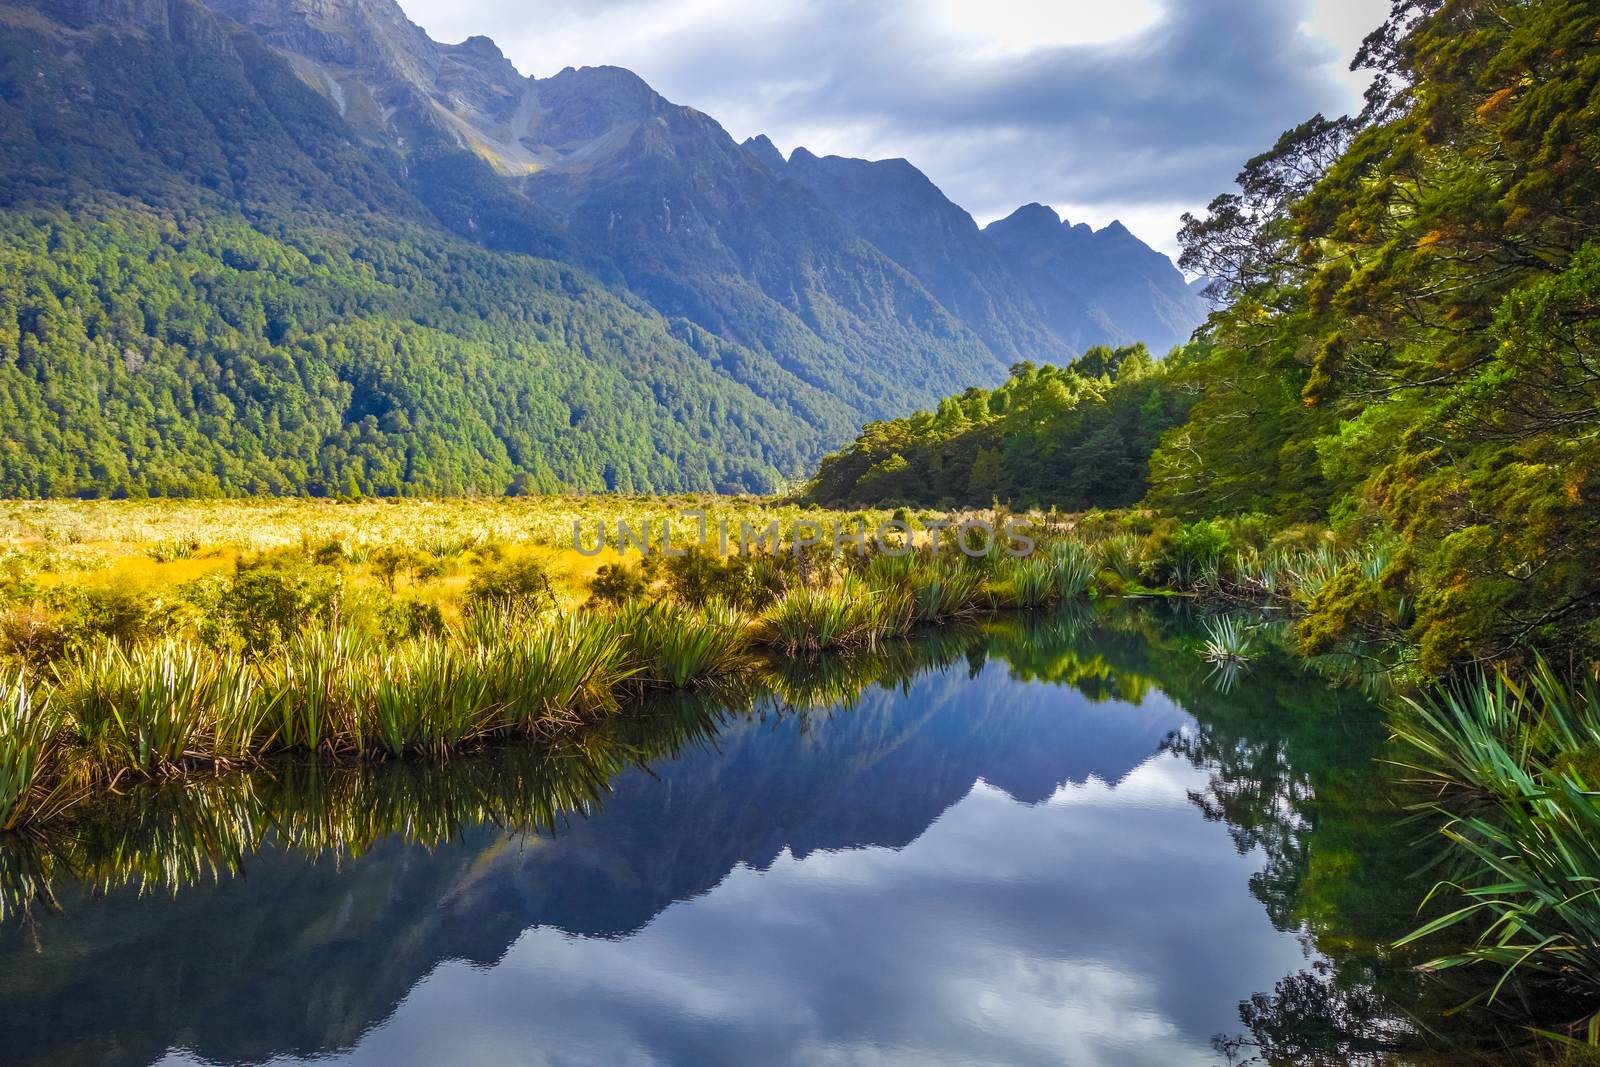 Lake in Fiordland national park, New Zealand by daboost